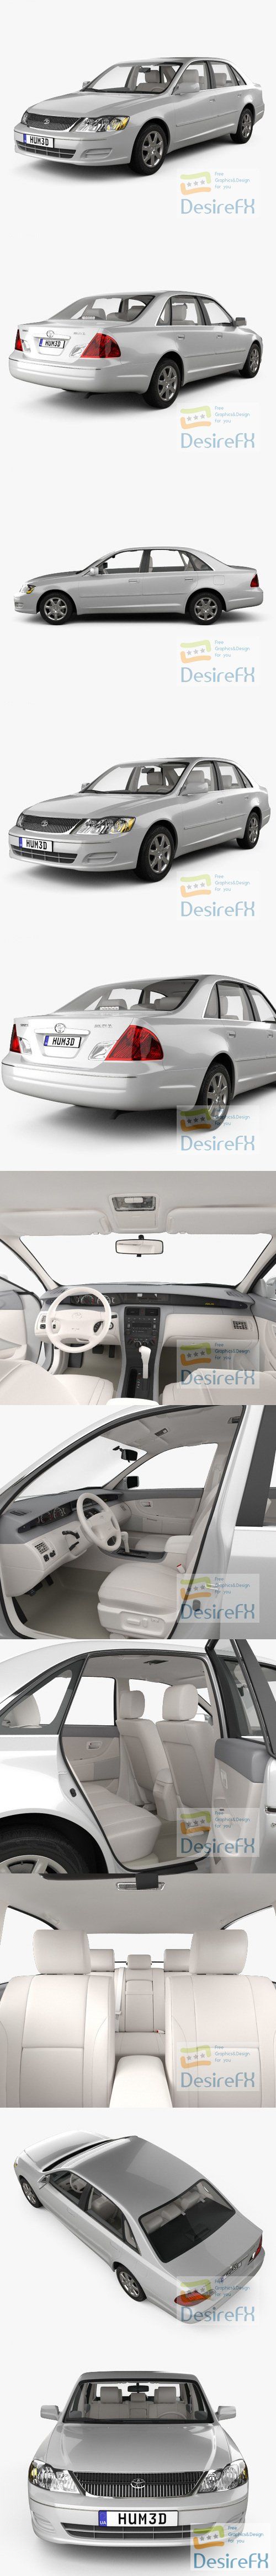 Toyota Avalon XL with HQ interior 2001 3D Model